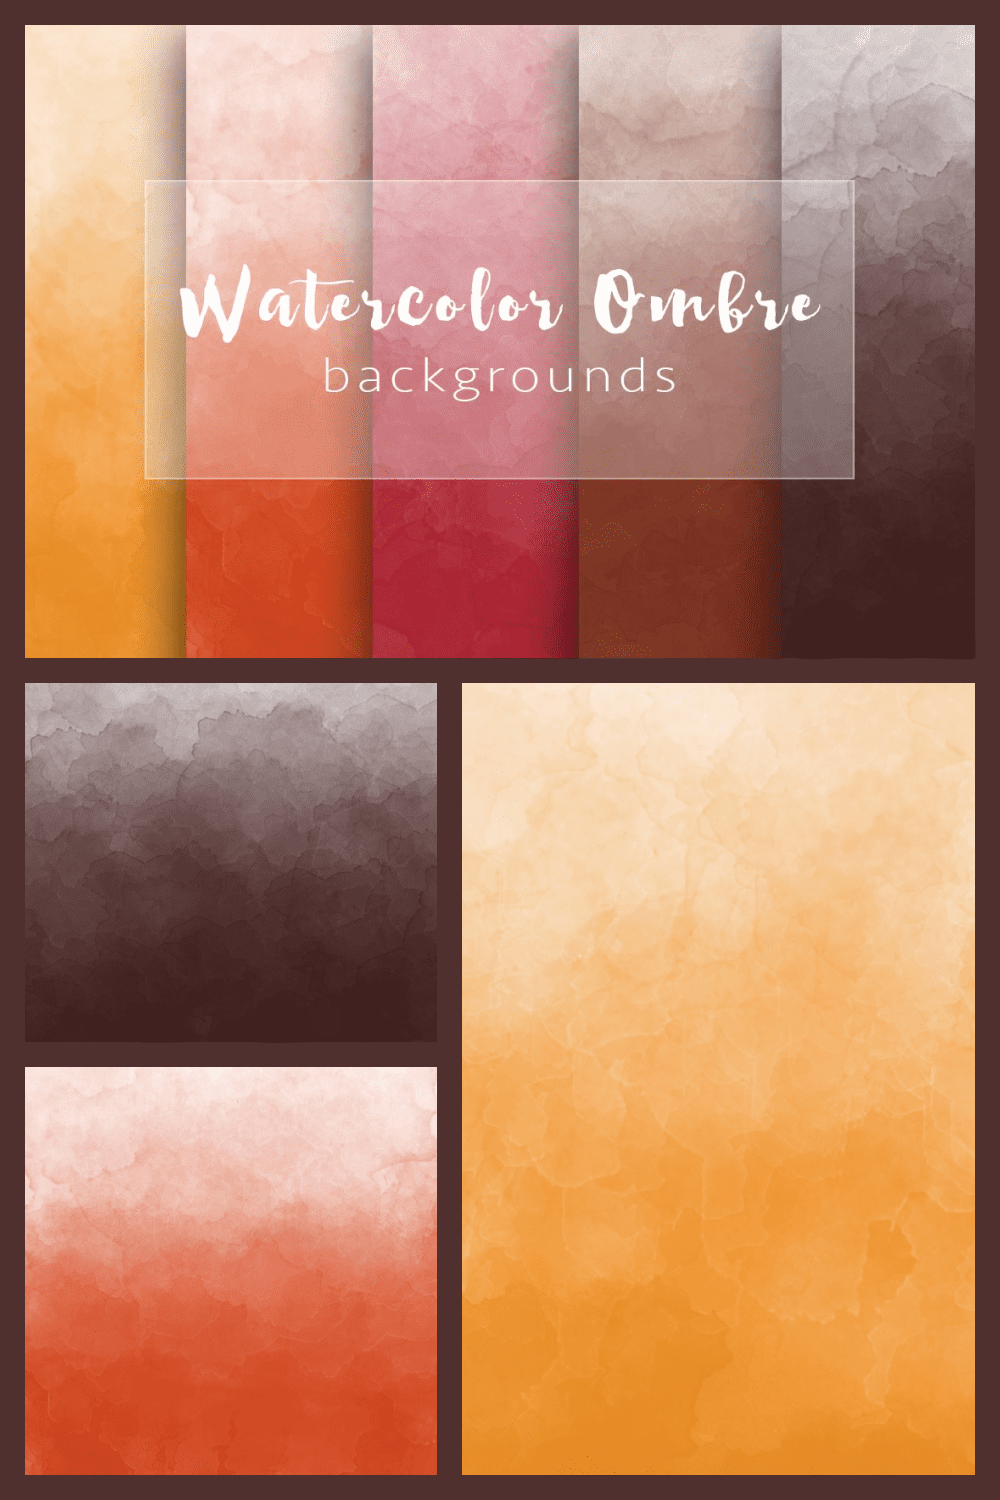 Collage of images with orange, yellow and brown textures.